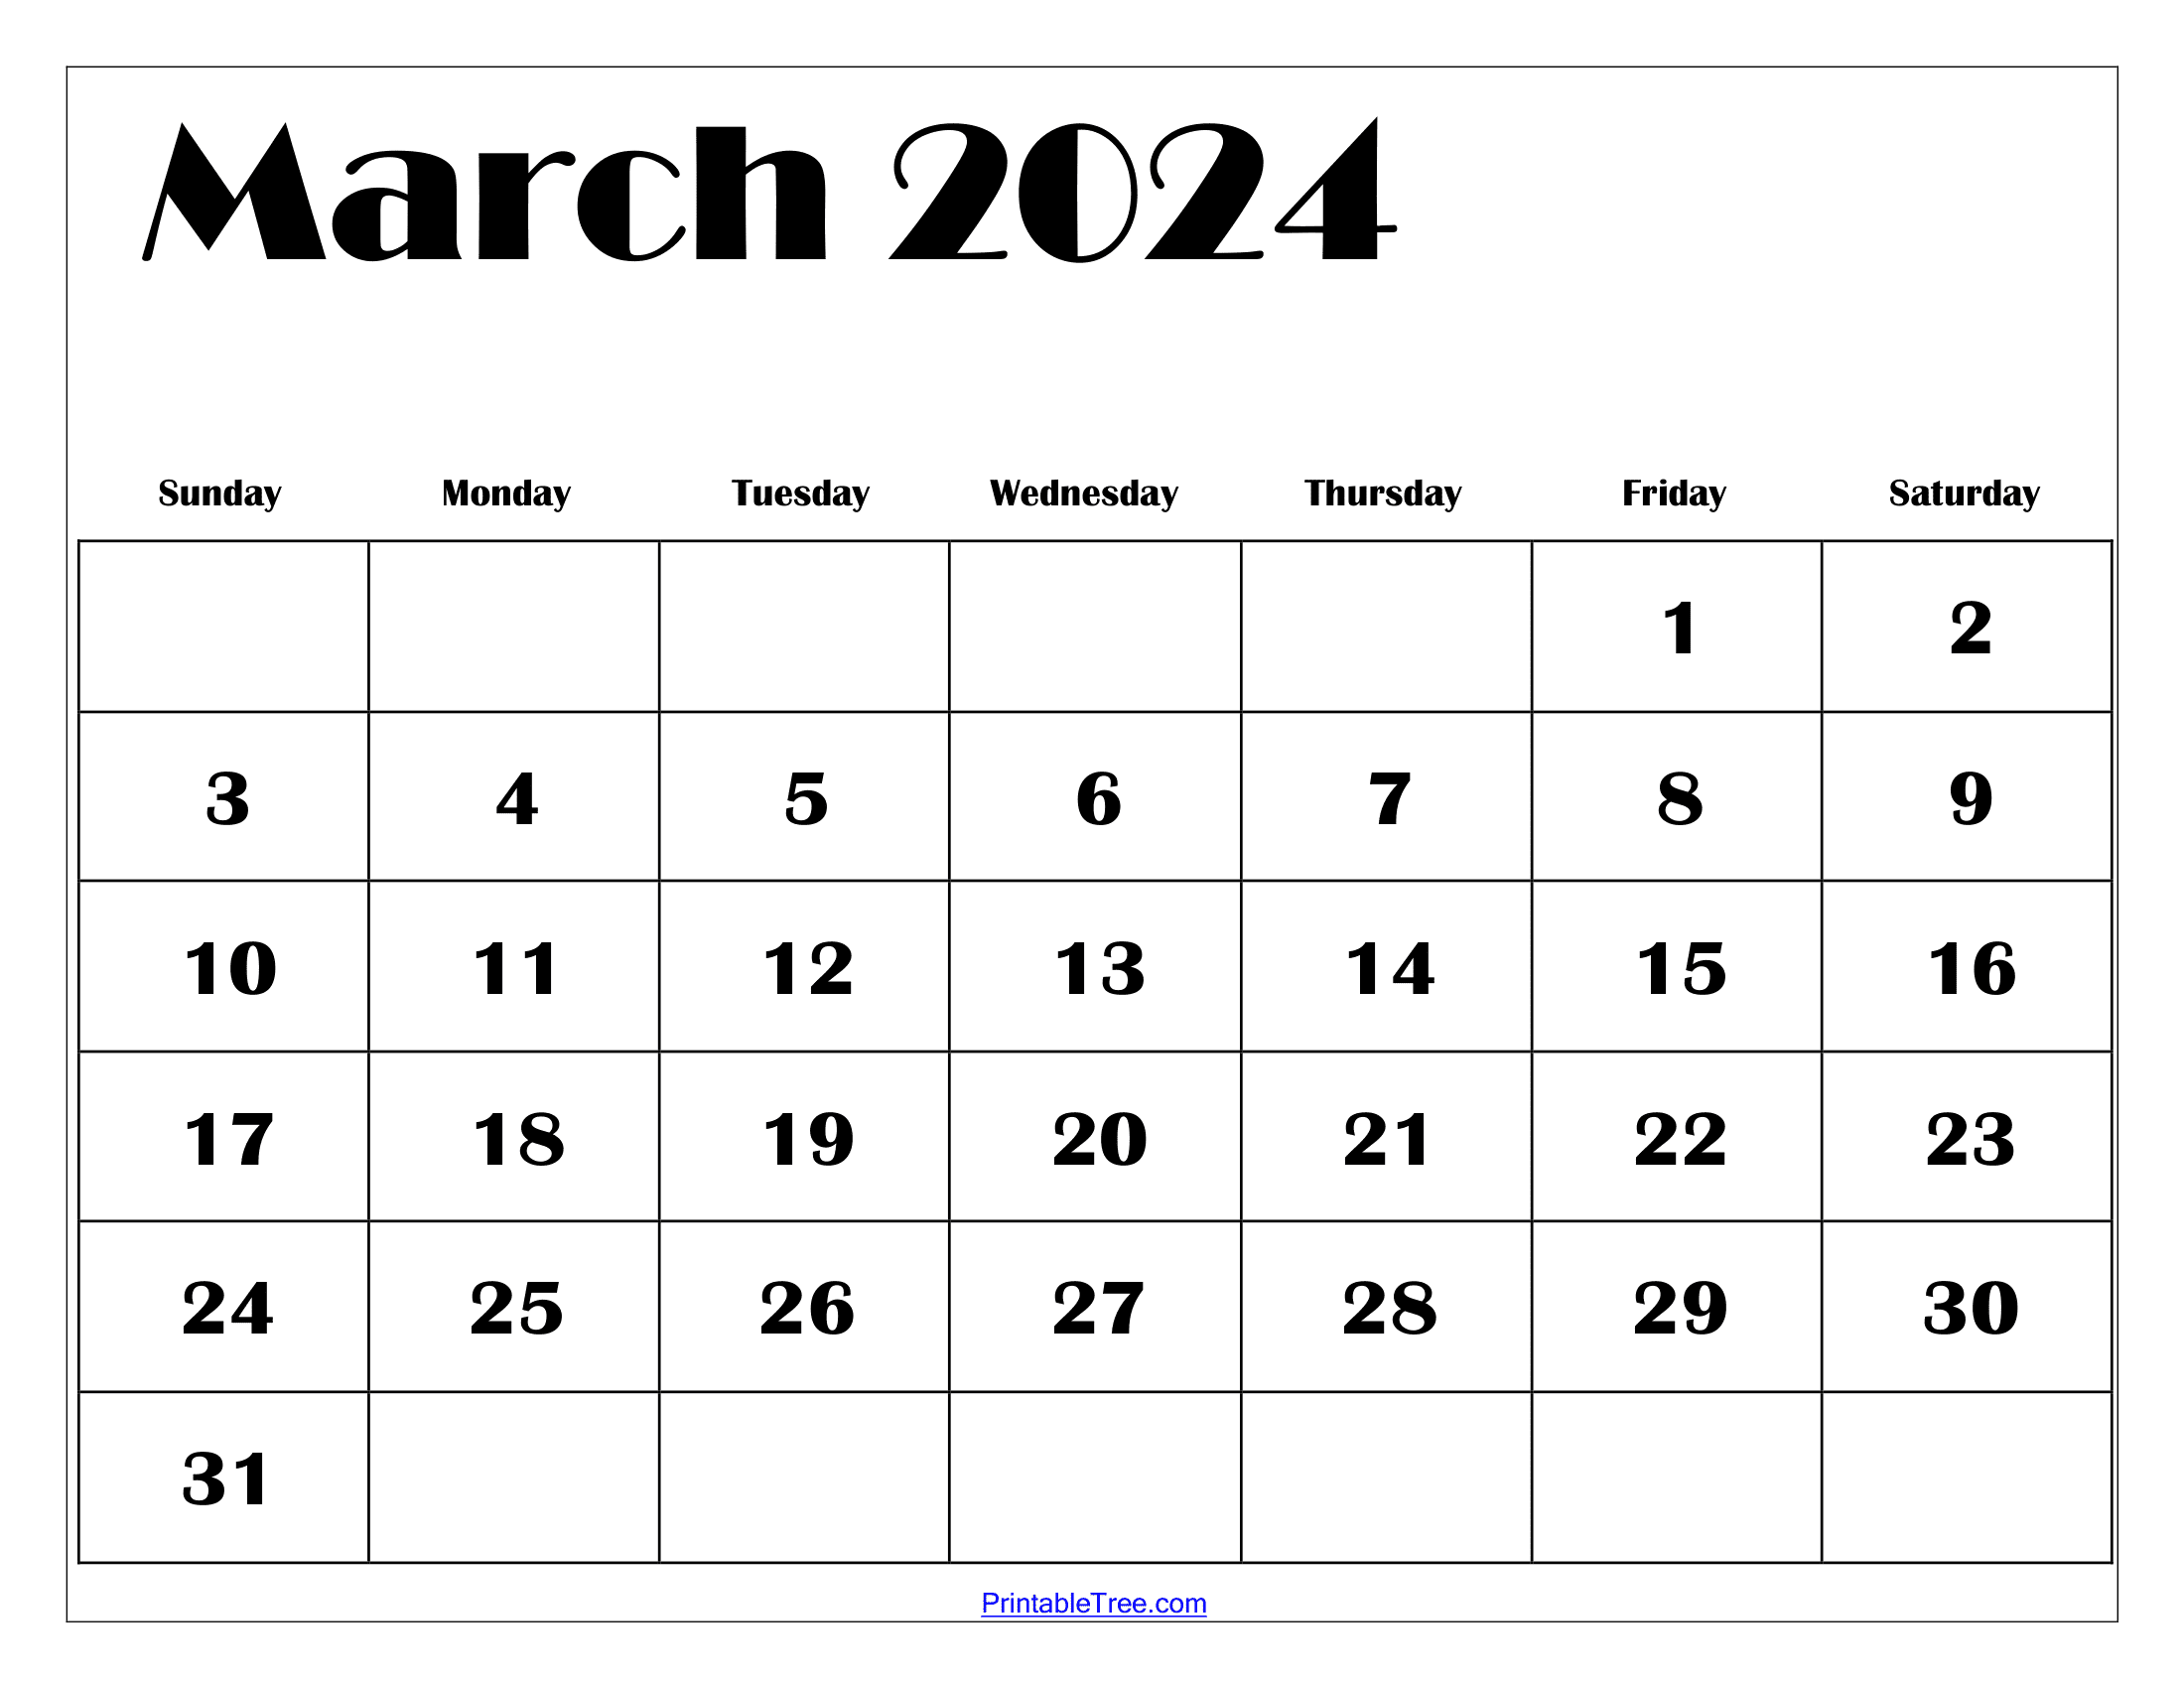 March 2024 Calendar Printable Pdf With Holidays Template Free for Calendar Template March 2024 Printable